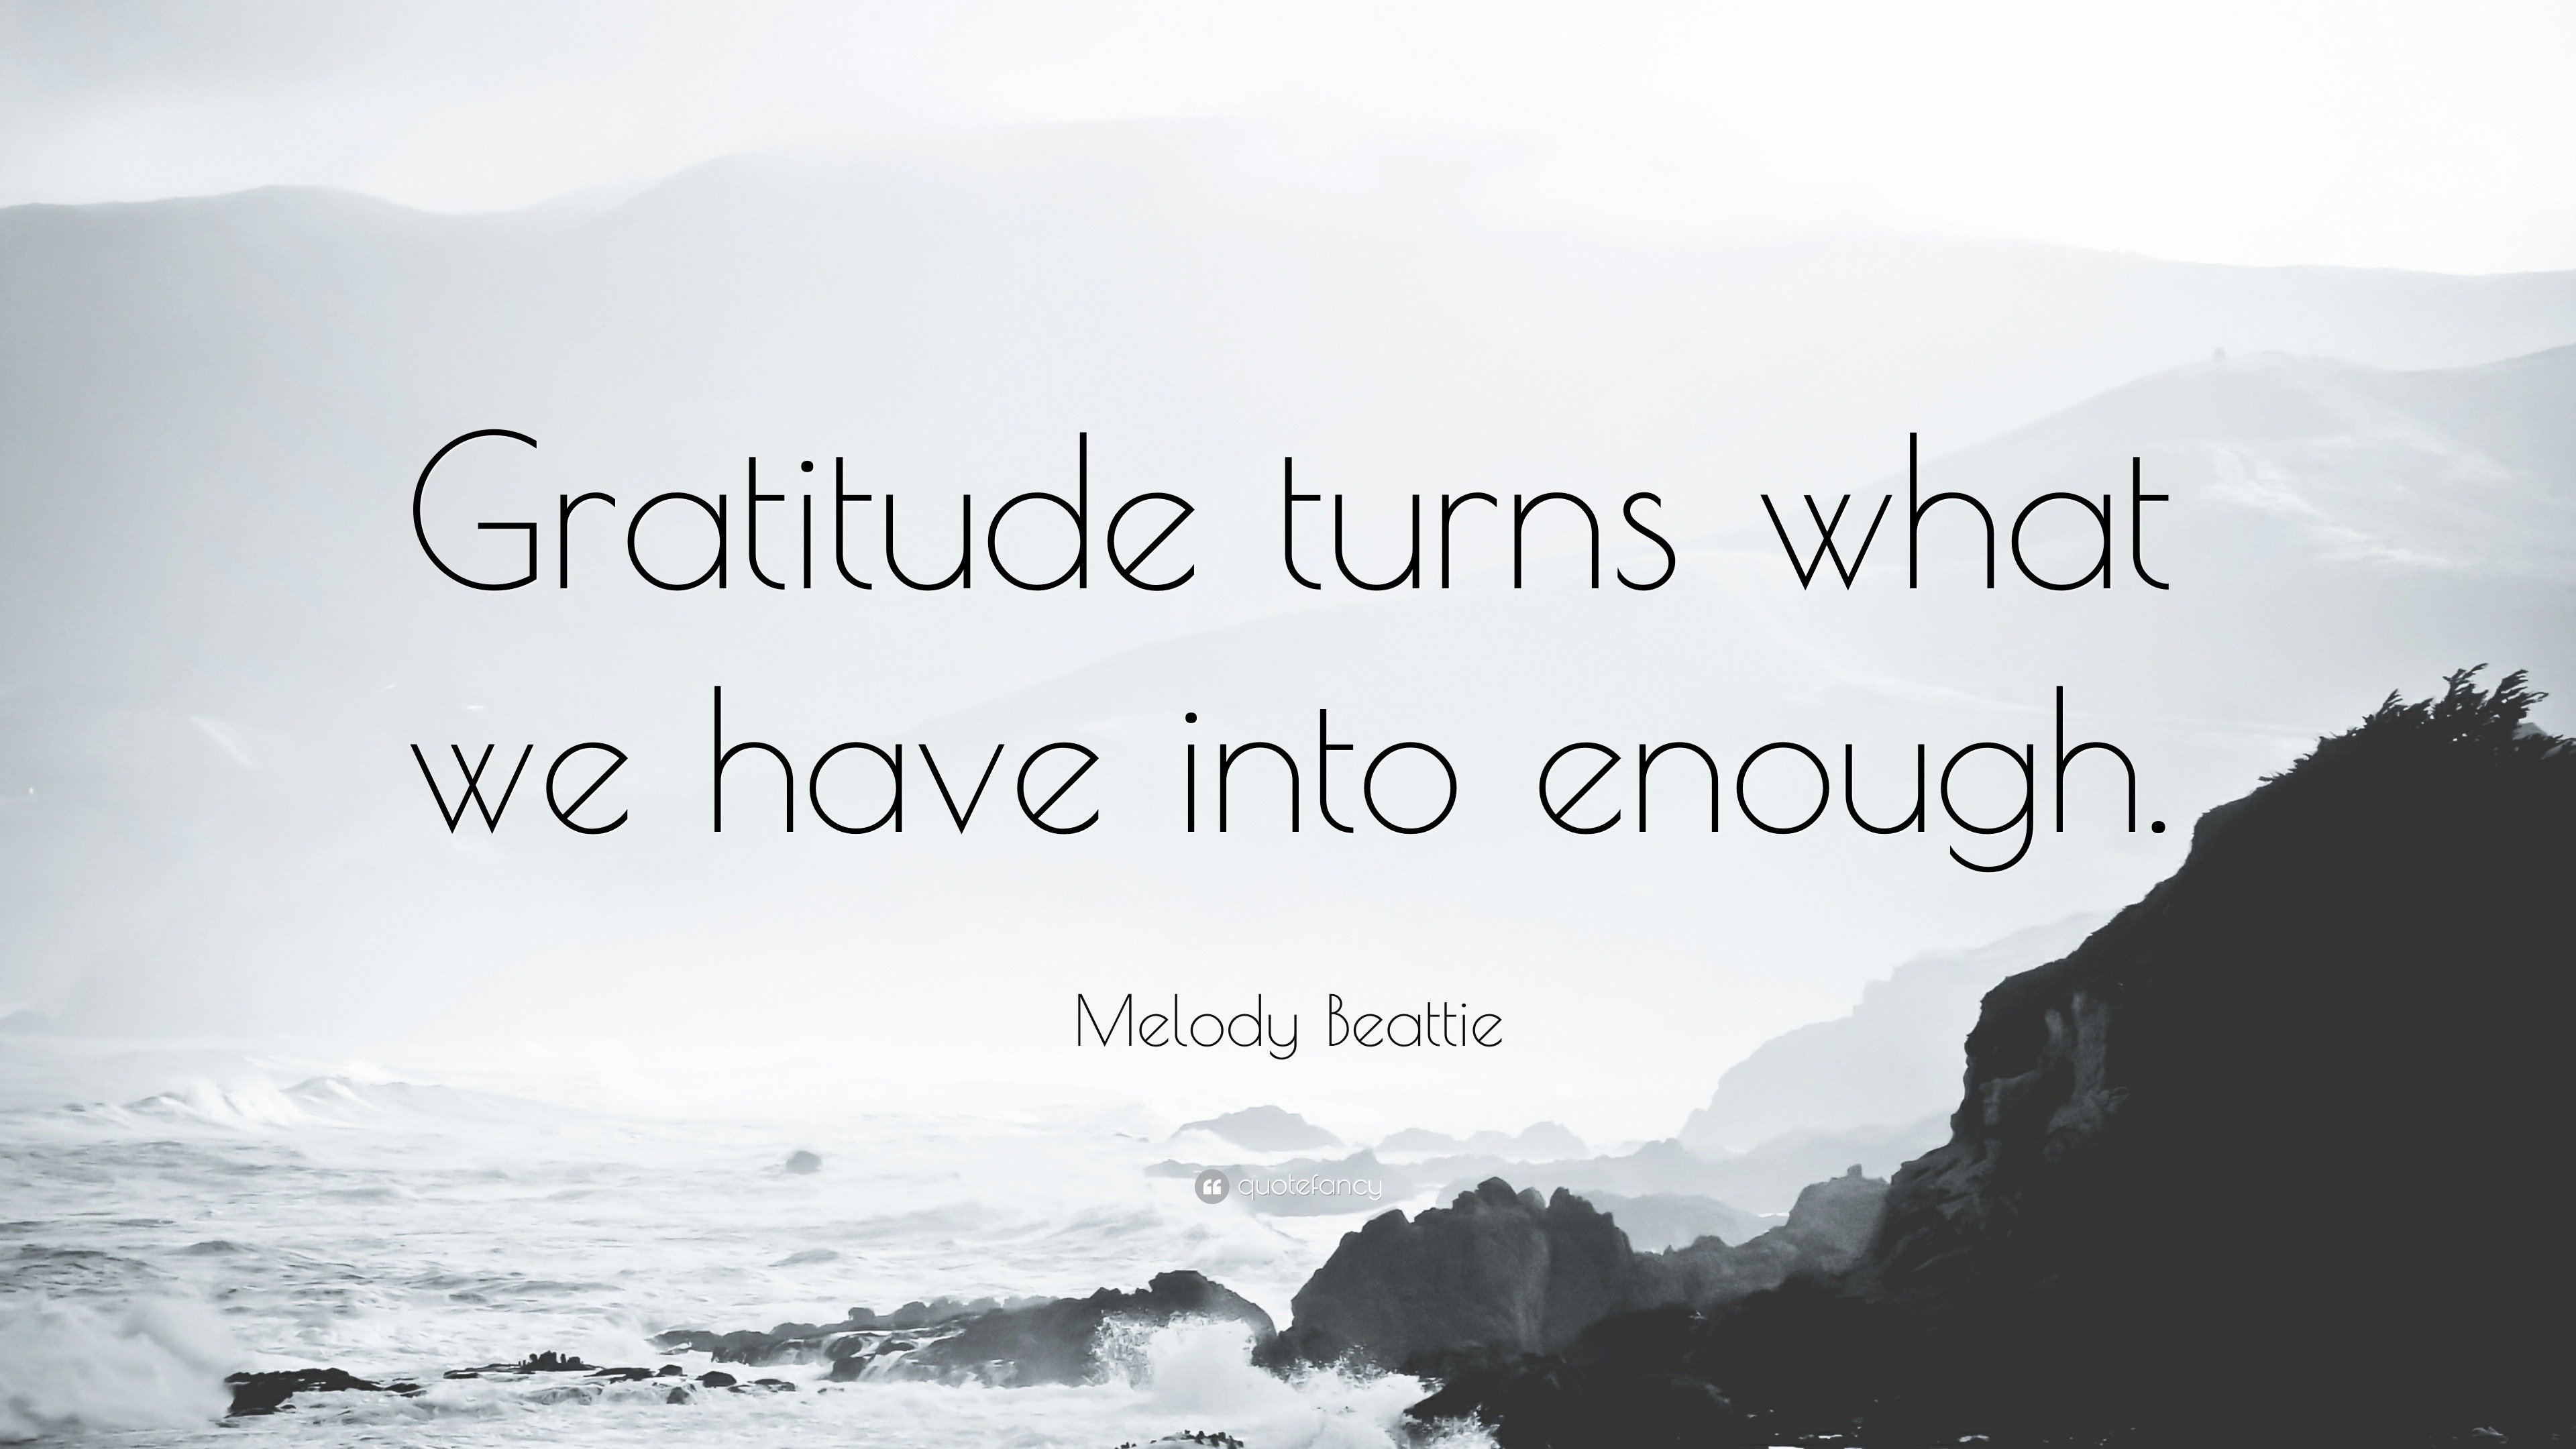 Being Grateful for what we have turns what we have into enough